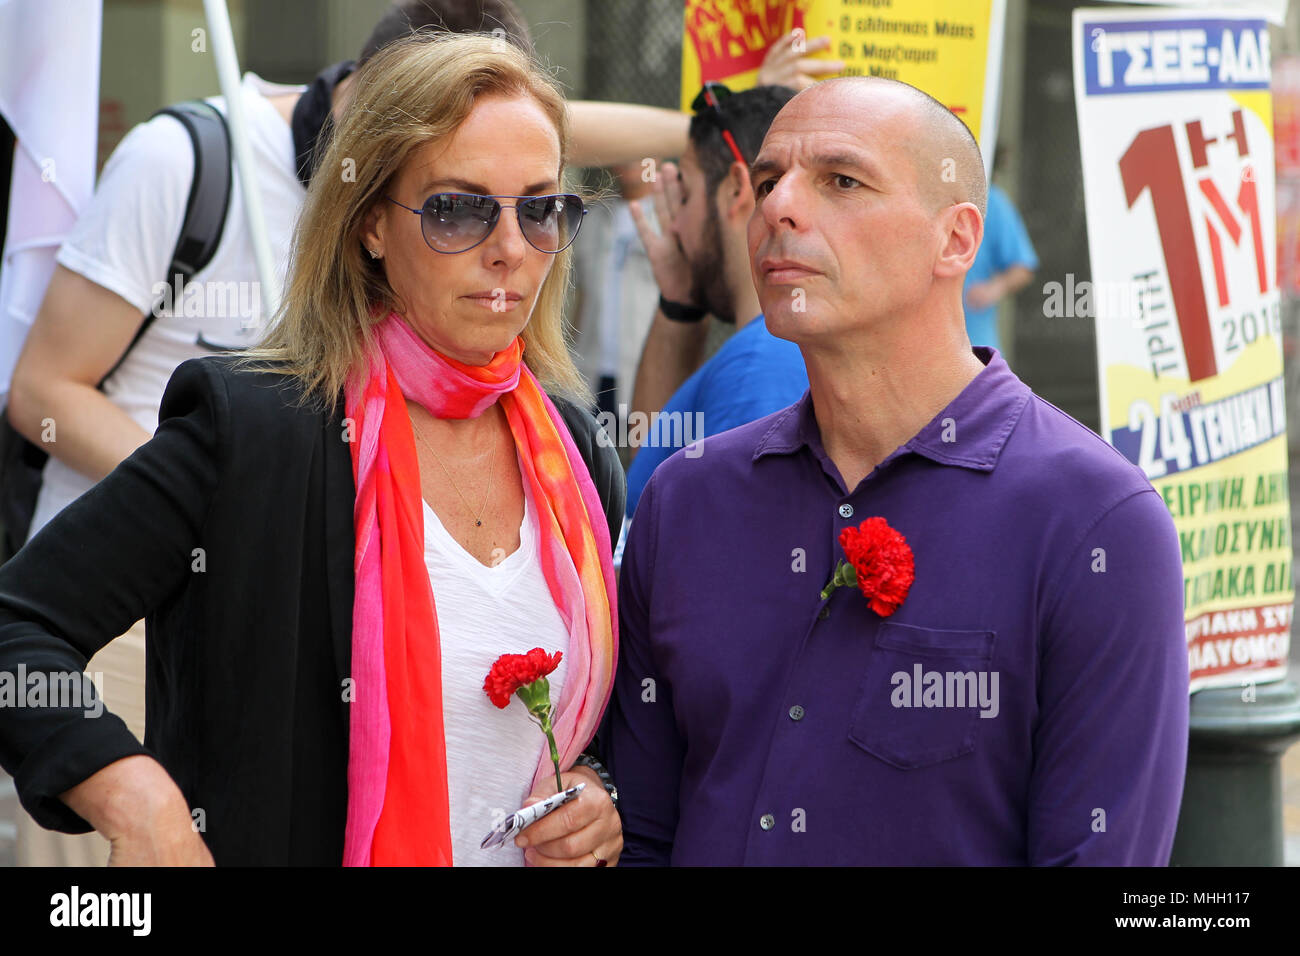 May 1, 2018 - Athens, Greece - Former Greek Finance Minister YANIS  VAROUFAKIS with his wife DANAE STRATOU take part with his party Diem 25 in  a MAY DAY rally in central